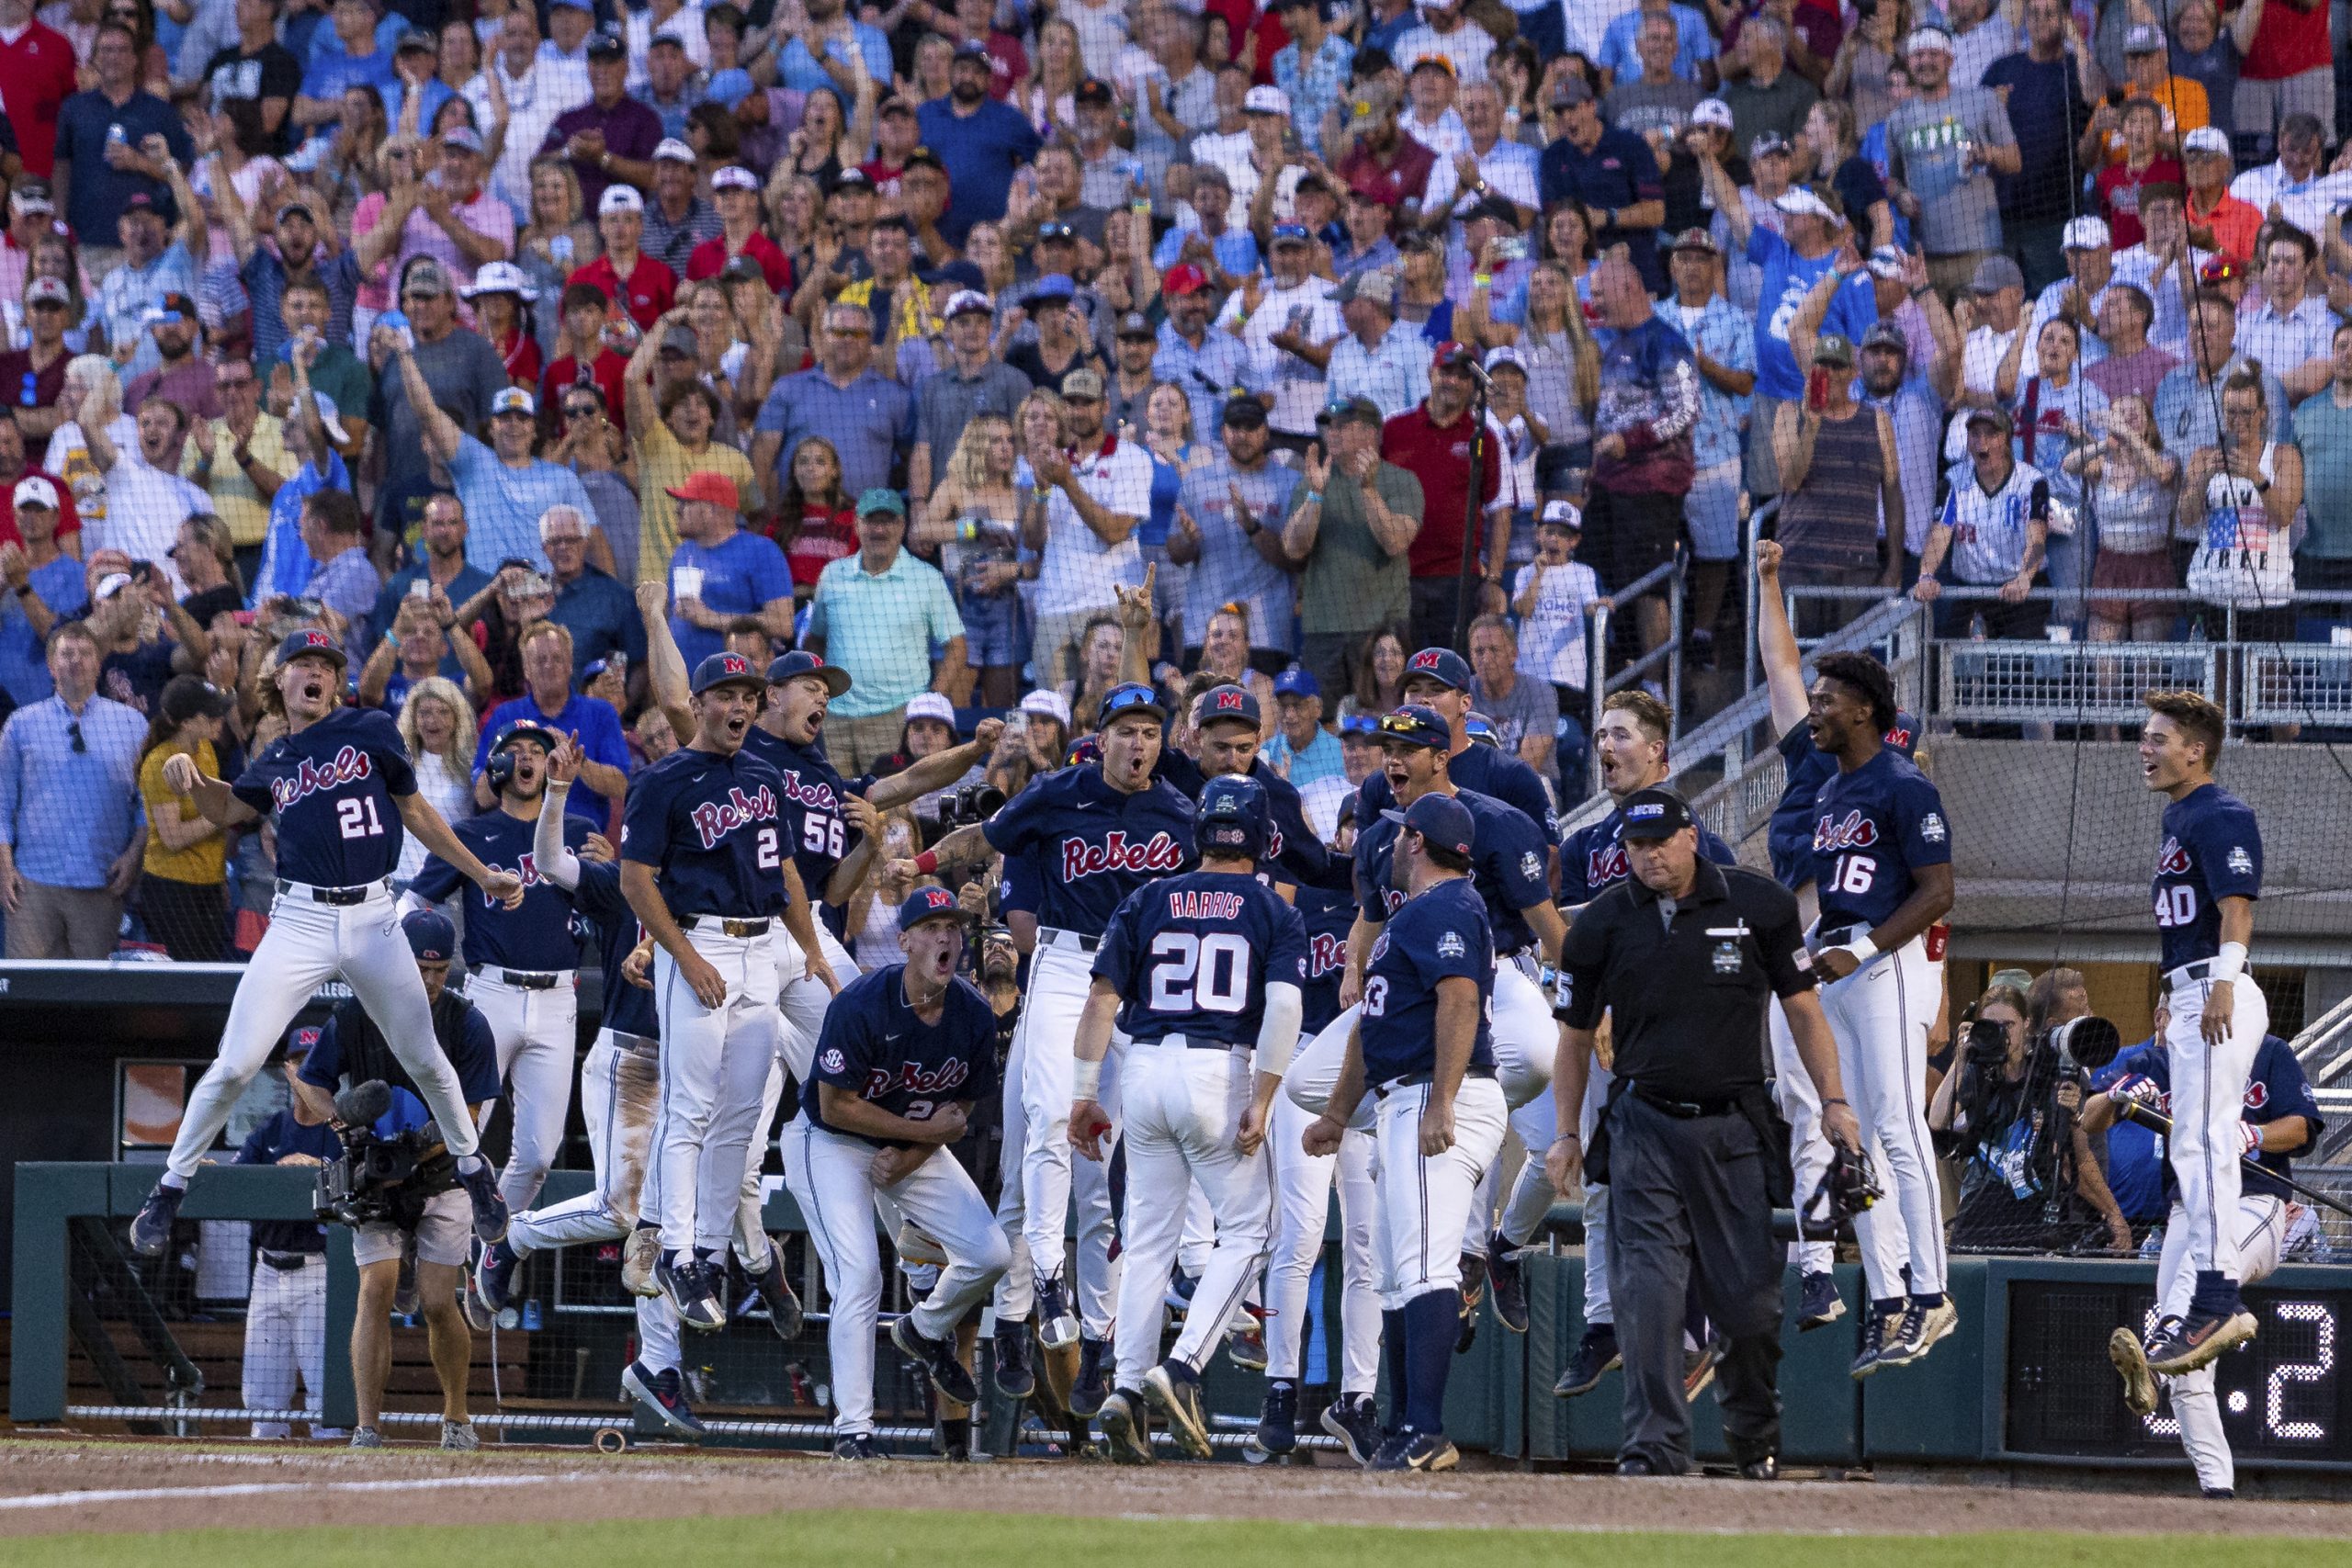 Ole Miss sweeps Oklahoma to win National Championship The Daily